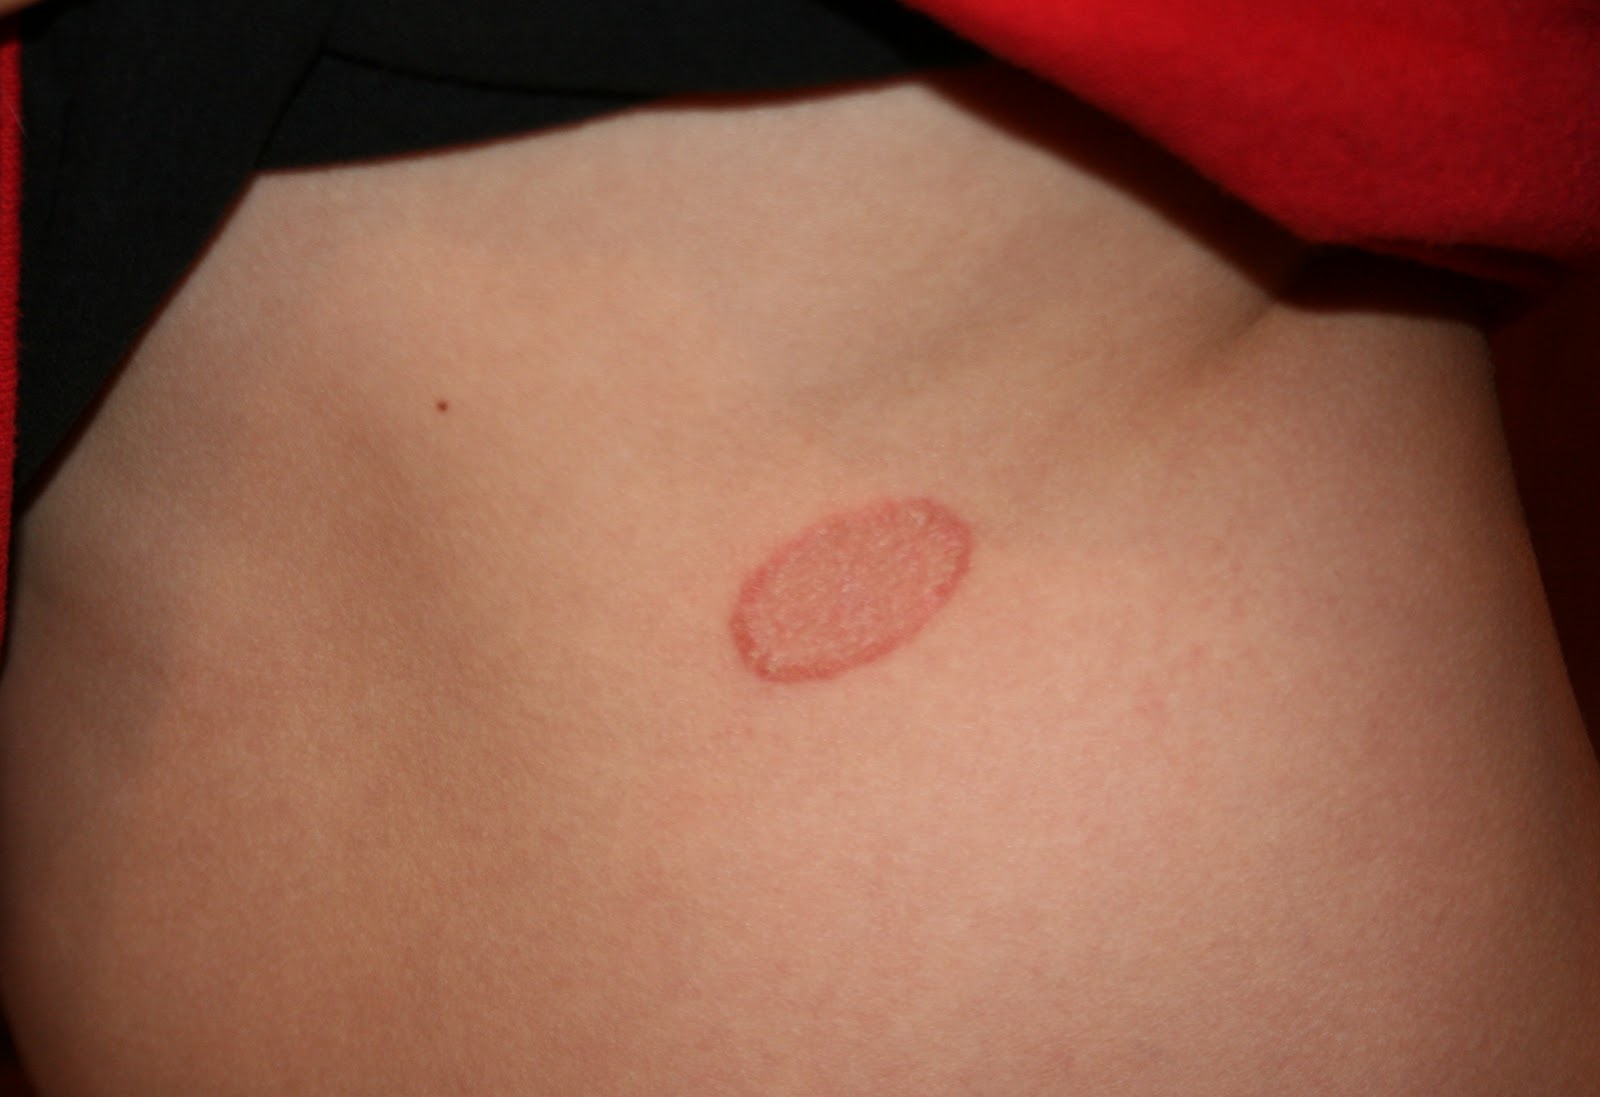 can you treat ringworm with terbinafine